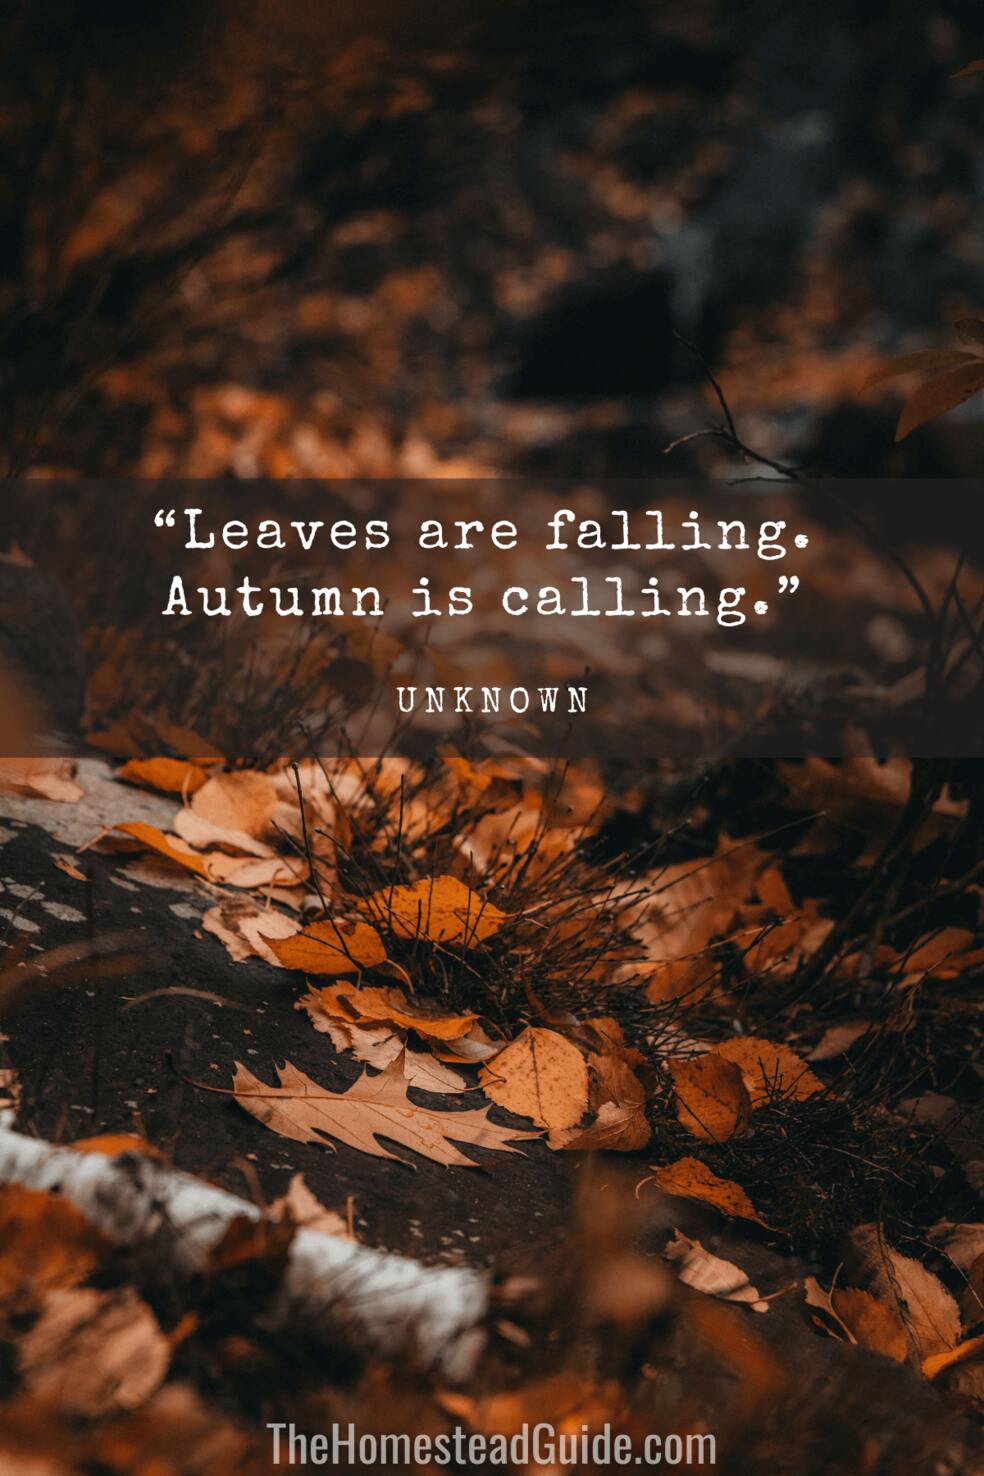 Leaves are falling. Autumn is calling.